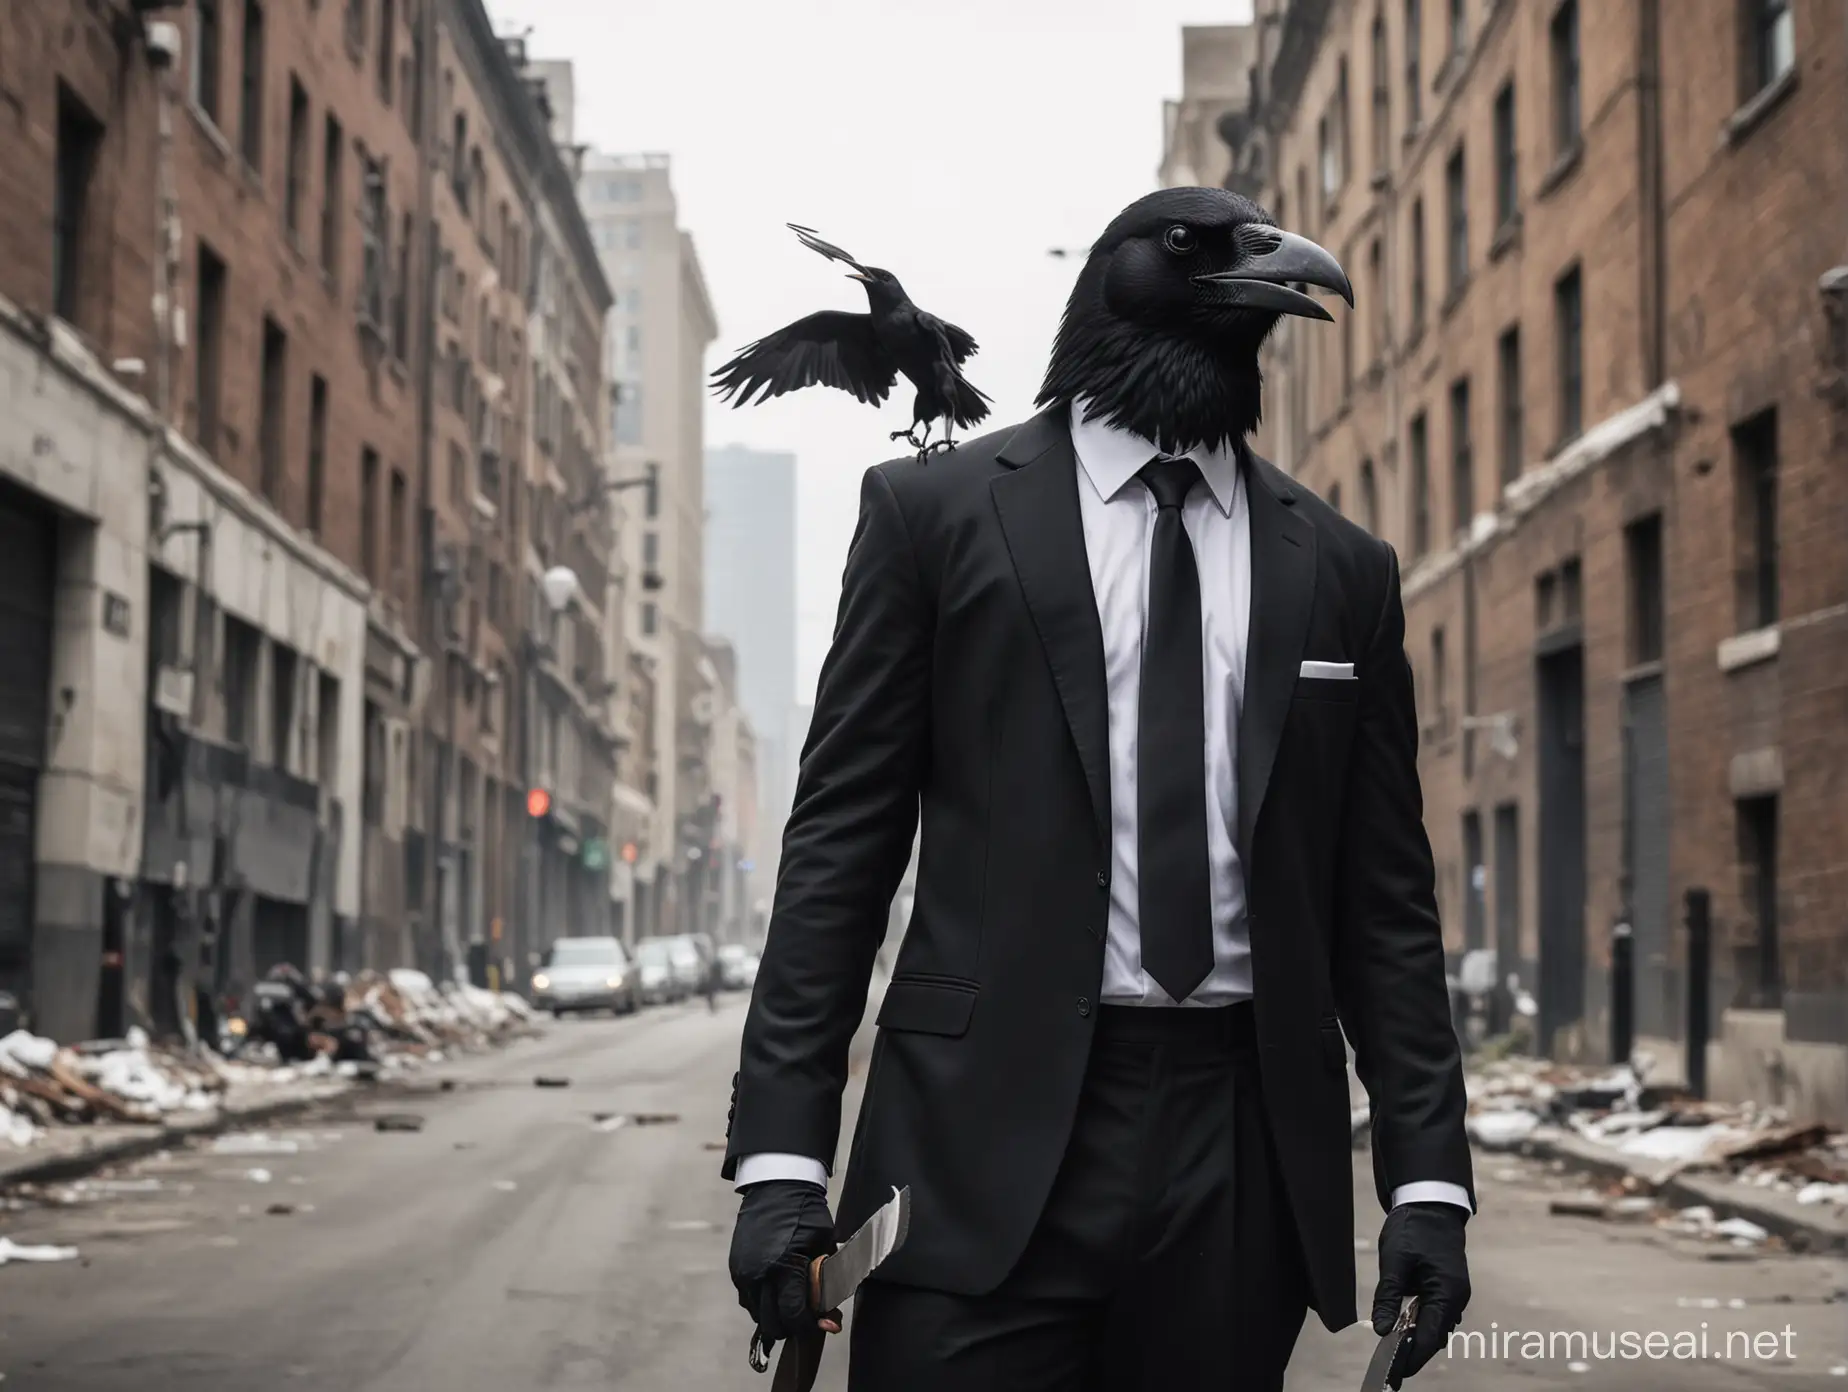 Urban Refined Crow in Suit Holding Knife